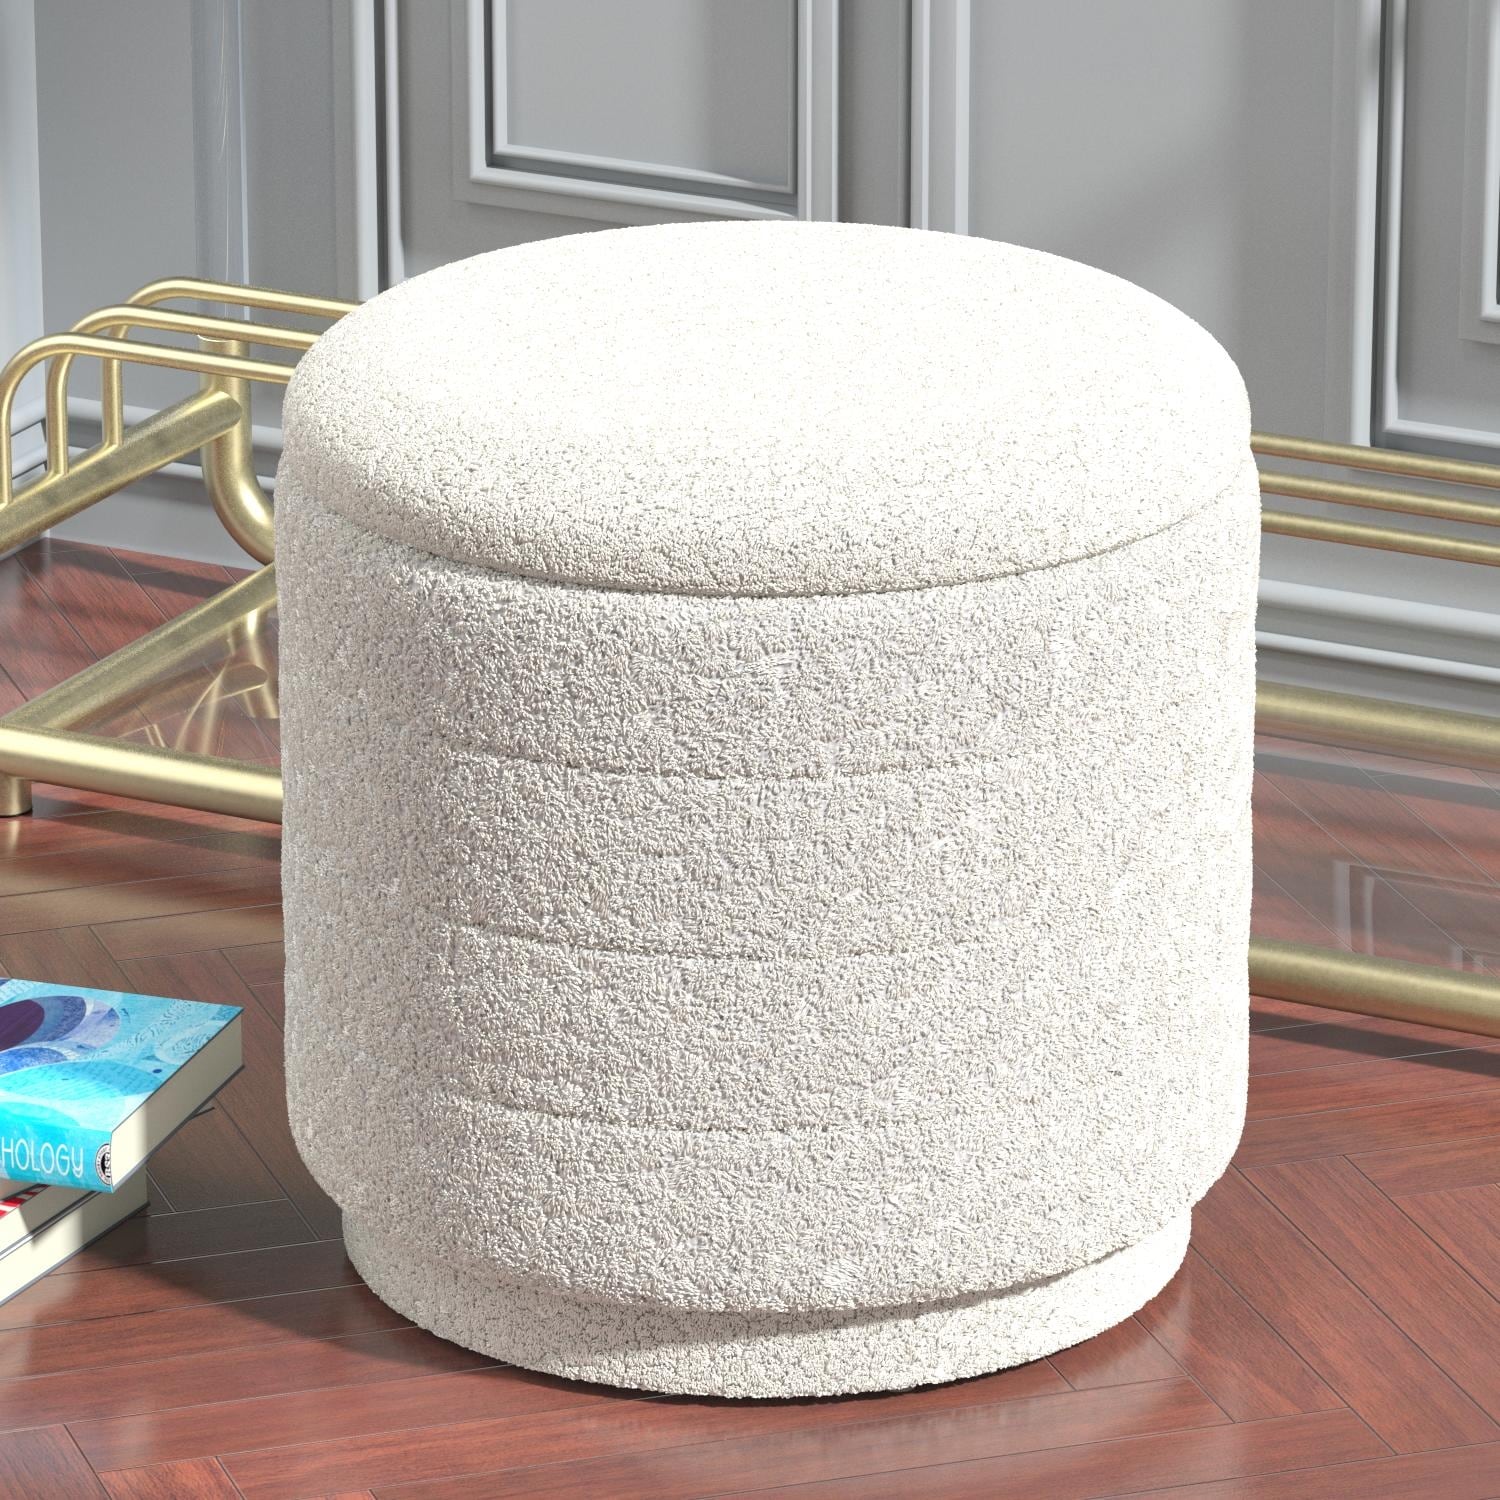 https://ak1.ostkcdn.com/images/products/is/images/direct/2a1ee776a262a7f92f8d1b2c61606ed8116e5ef5/Velvet-Wool-Fabric-Round-Pouf-Storage-Ottoman-Living-Room-Metal-Foot-Stool-Toy-Chest-Storage-Boxes-for-Bedroom-Living-Room.jpg